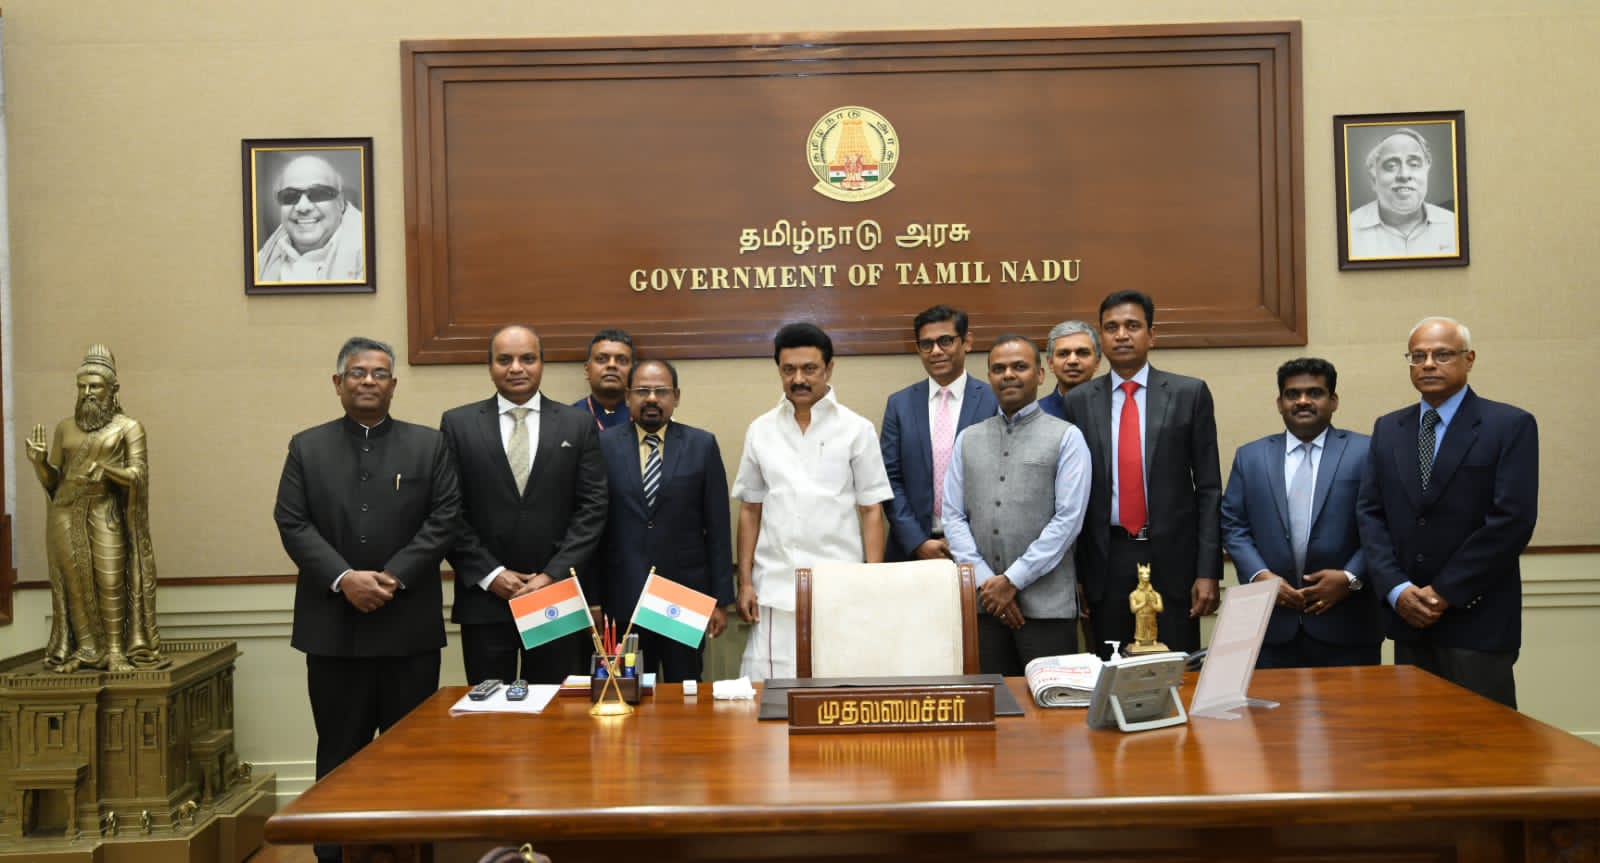 HC Inbasekar S, as a part of HOMs delegation to Tamil Nadu, called on Chief Minister Thiru M.K.Stalin & discussed opportunities to promote trade with PNG on October 17, 2022.